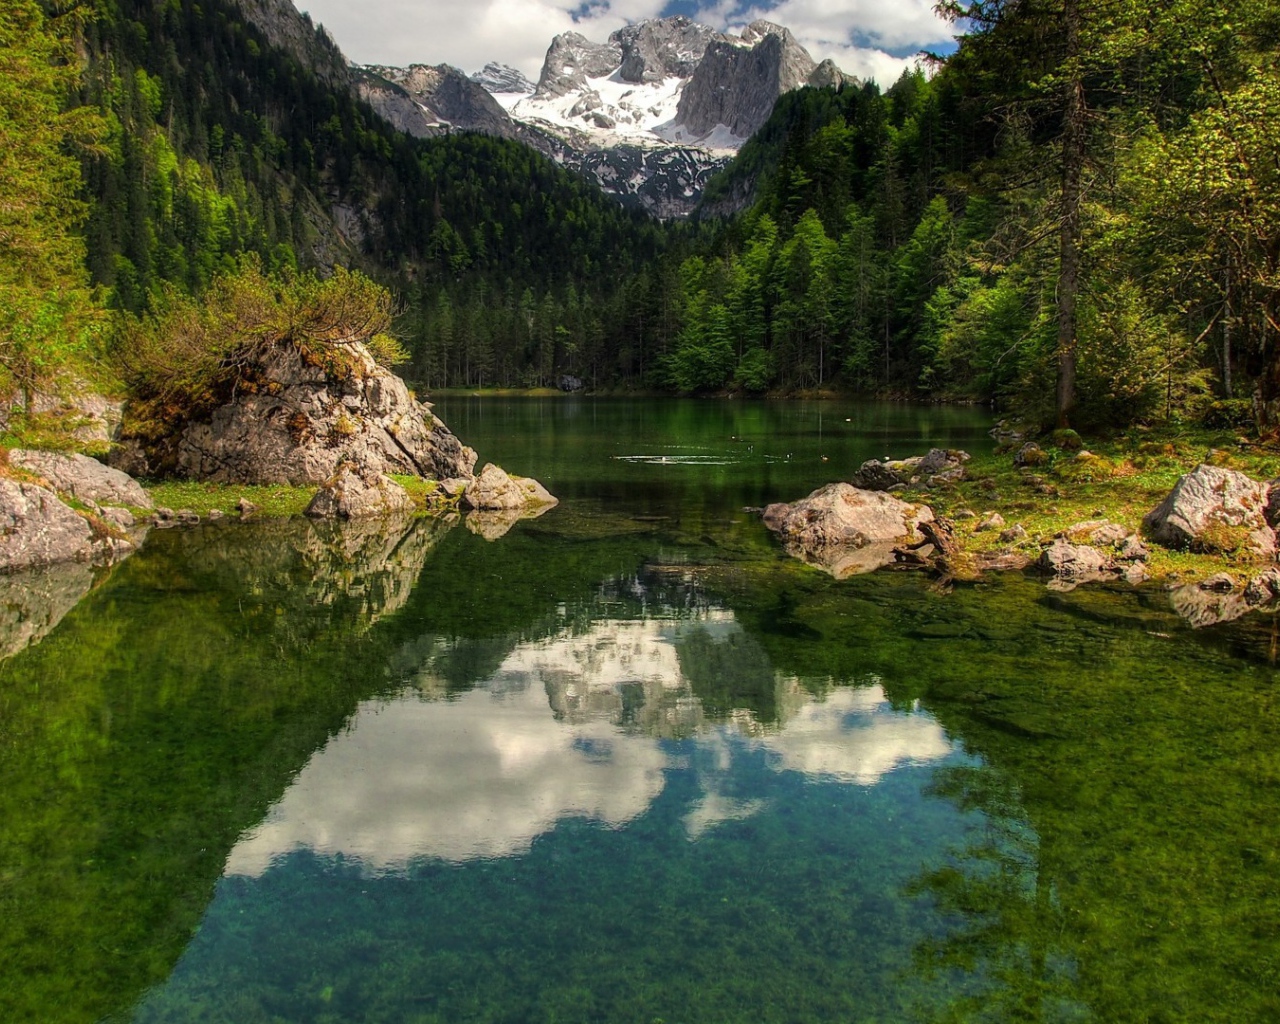 Lake in a mountain valley